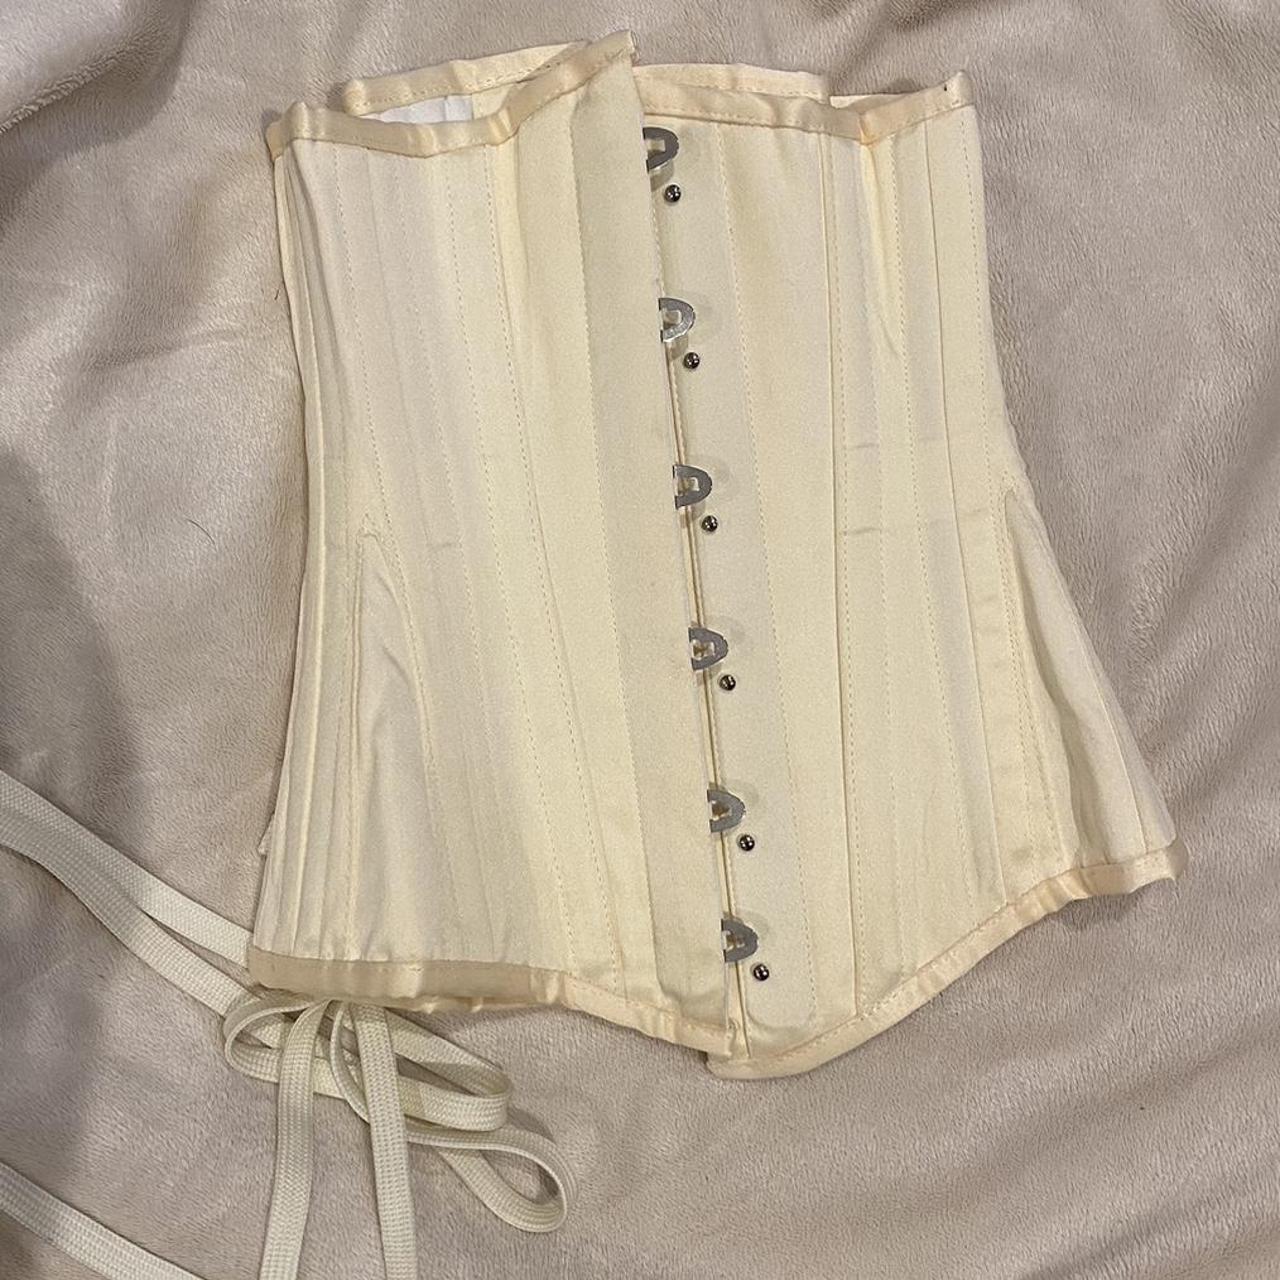 Corset story, cream, mid size corset. 22 inches - Depop